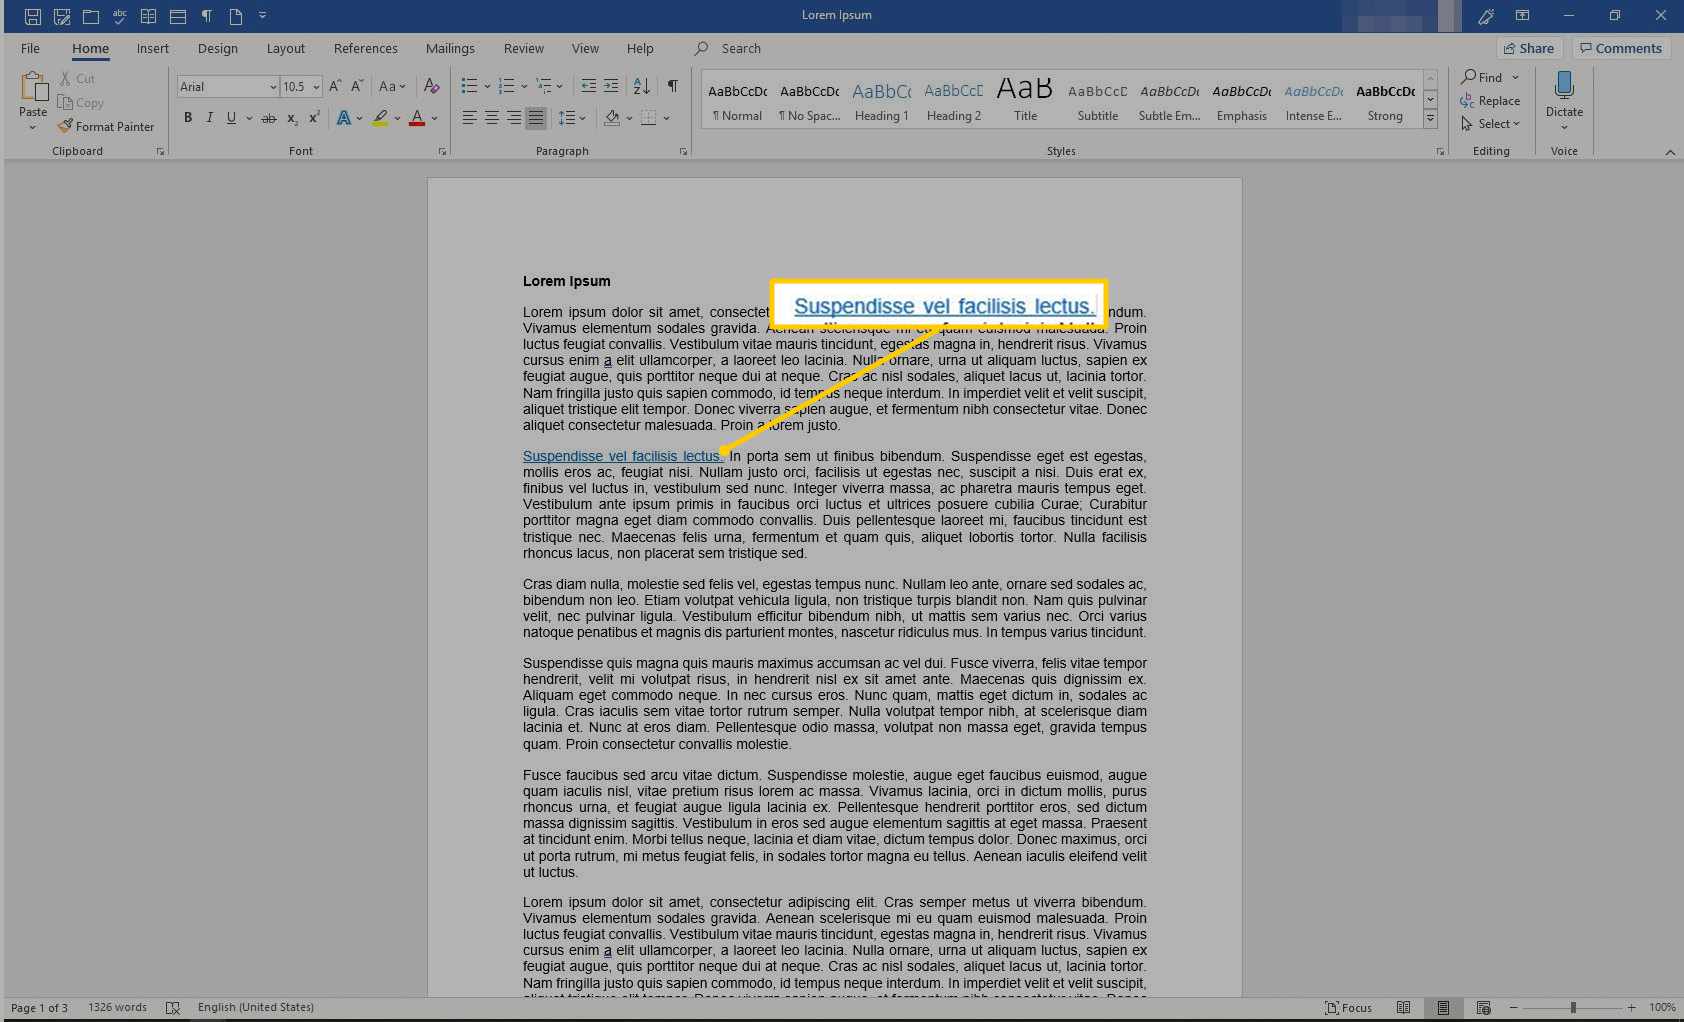 remove hyperlink in word references on macbook